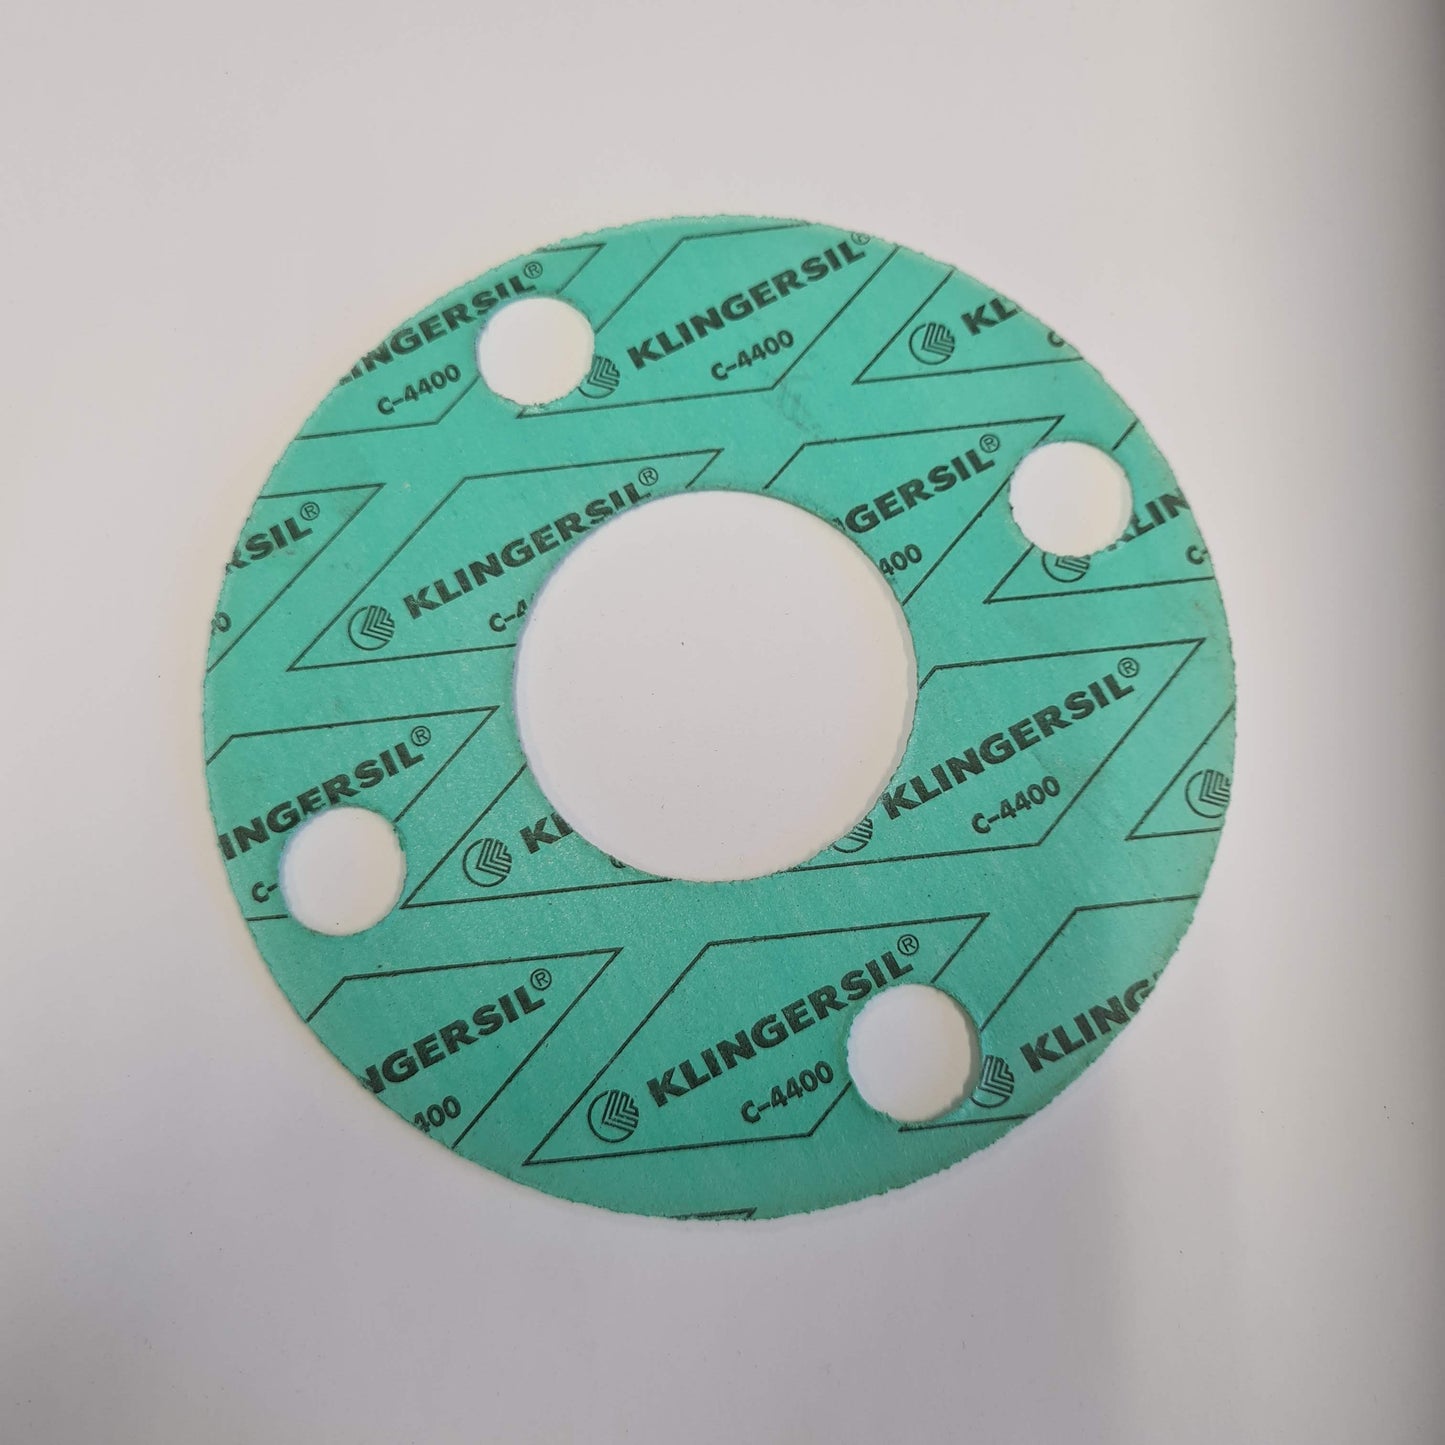 PN14 AS4087 Flange Gaskets 1/2" to 12" 15NB to 300NB